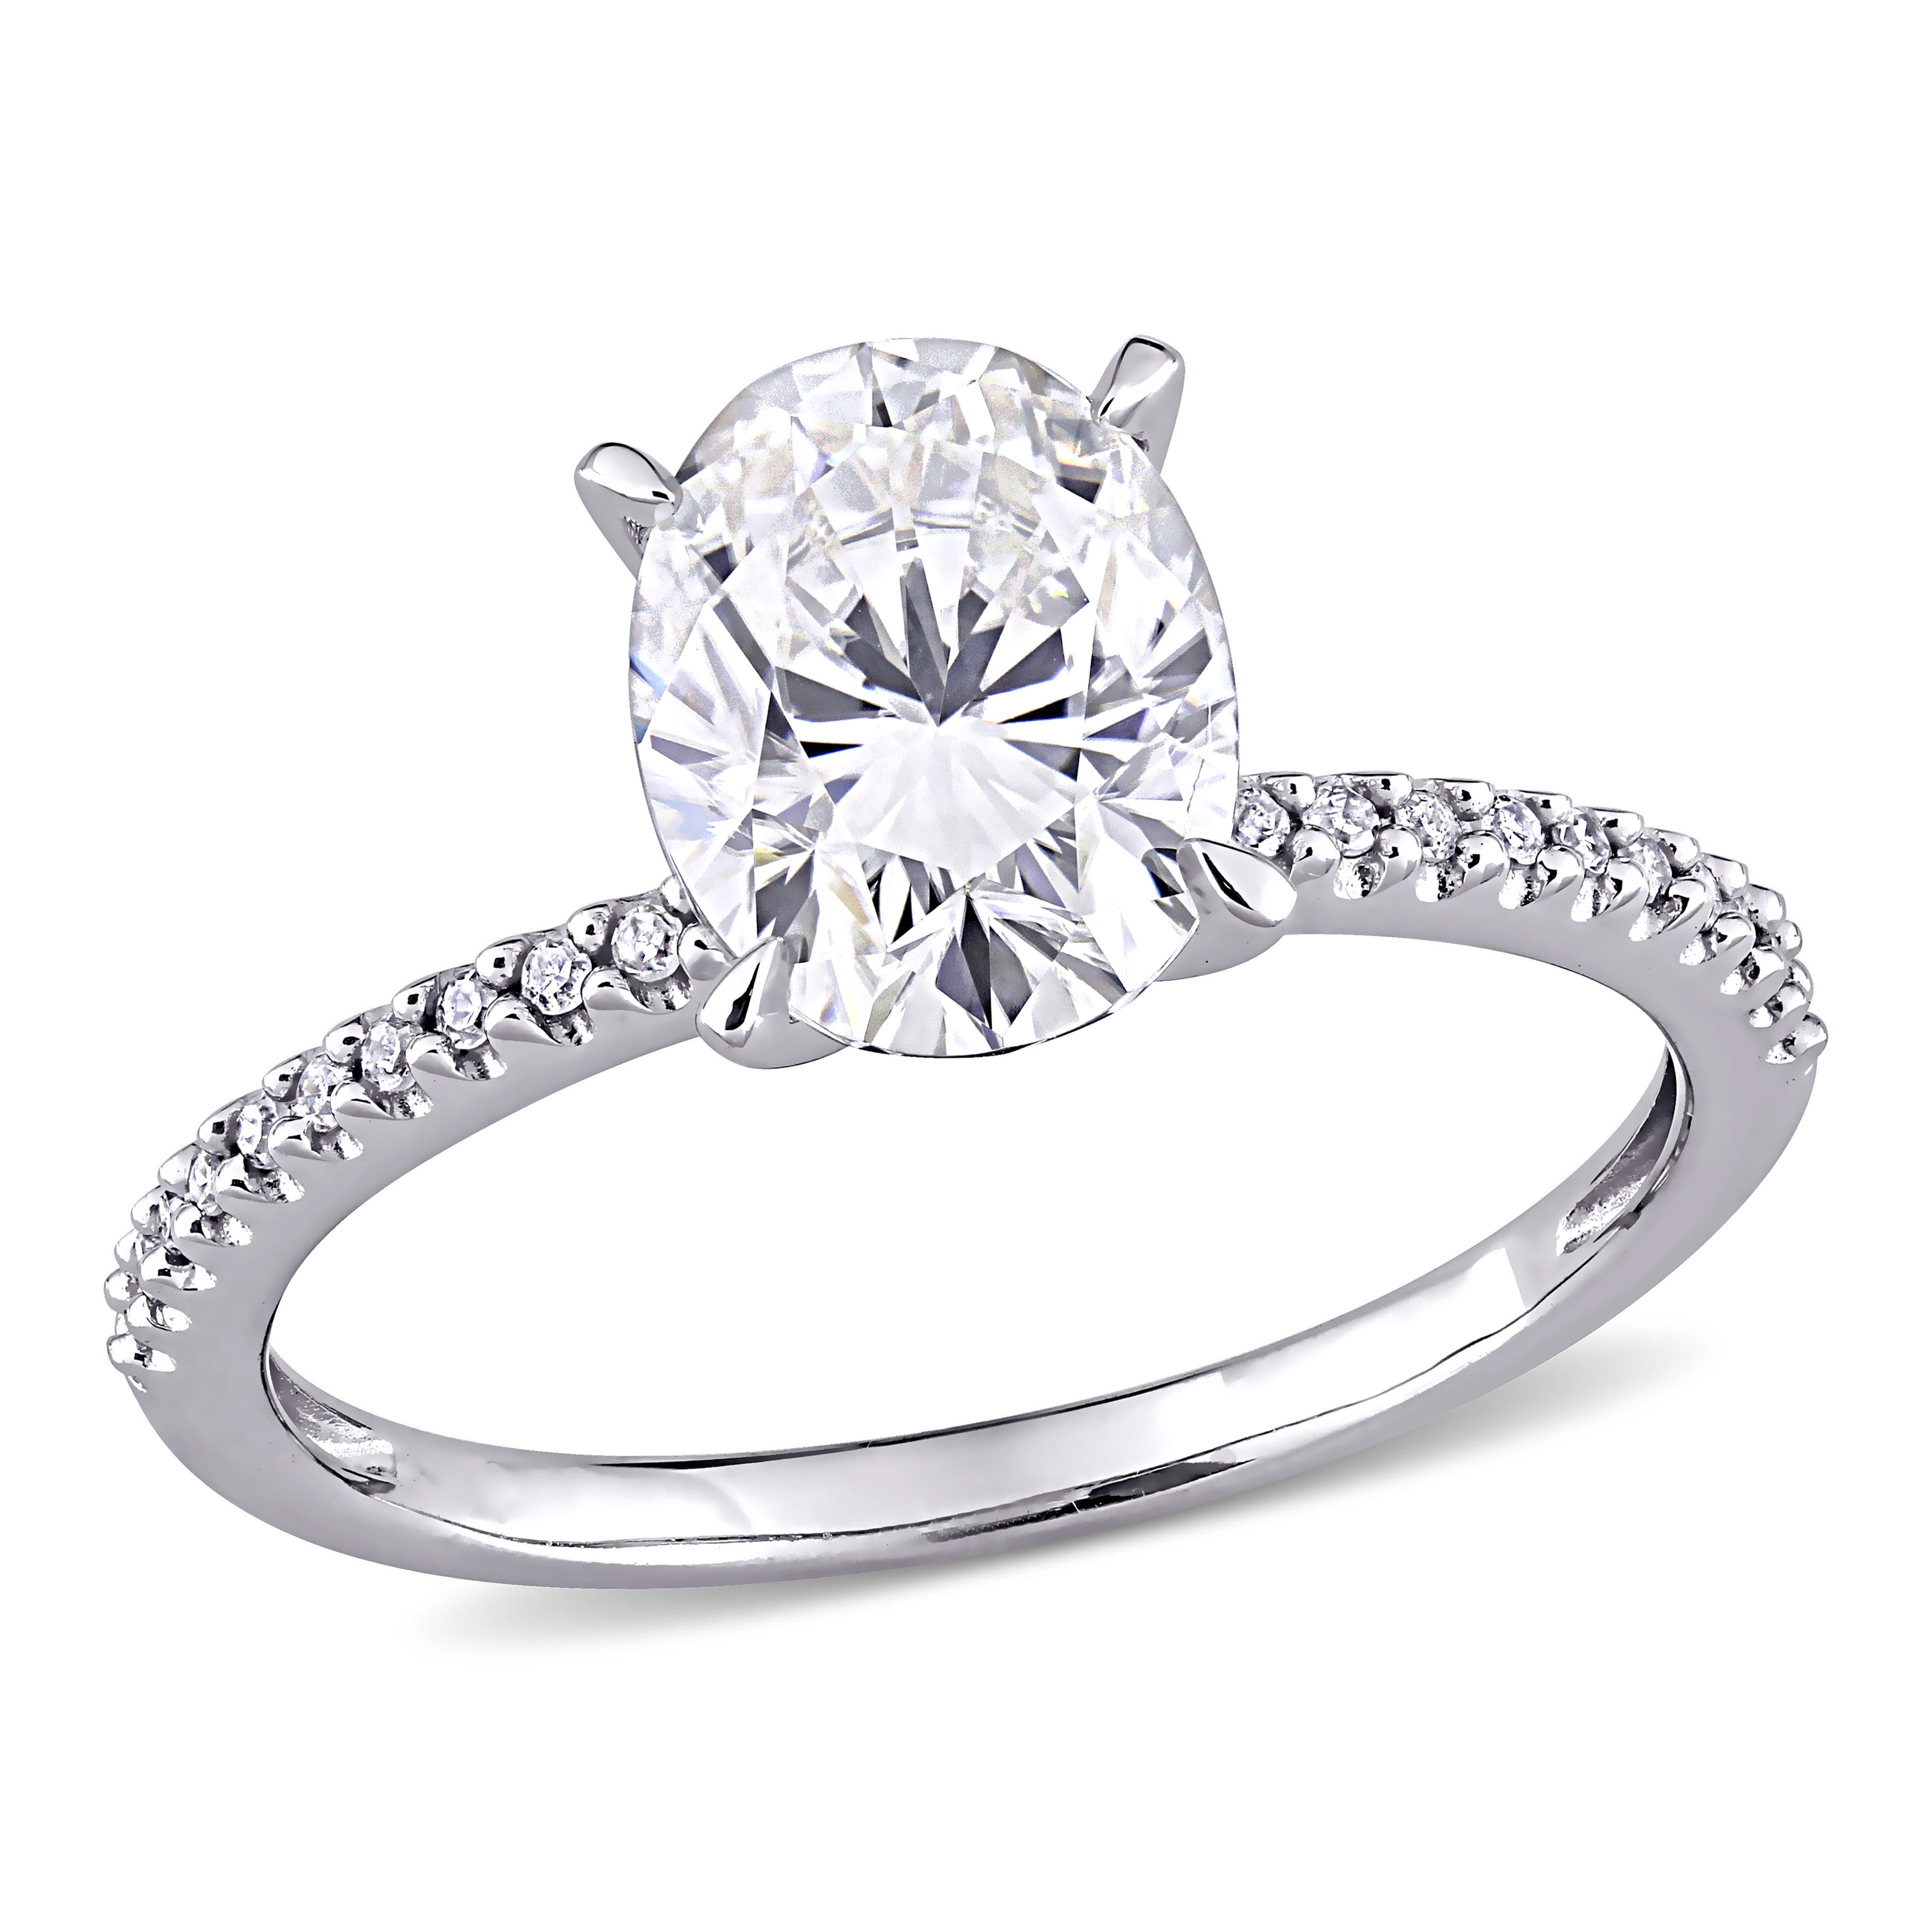 Lab Created Diamond Diamond Ring 1.50 Ct Oval Cut White Diamond & Moissanite 10K Engagement Ring. 14K White Gold And Sterling Silver